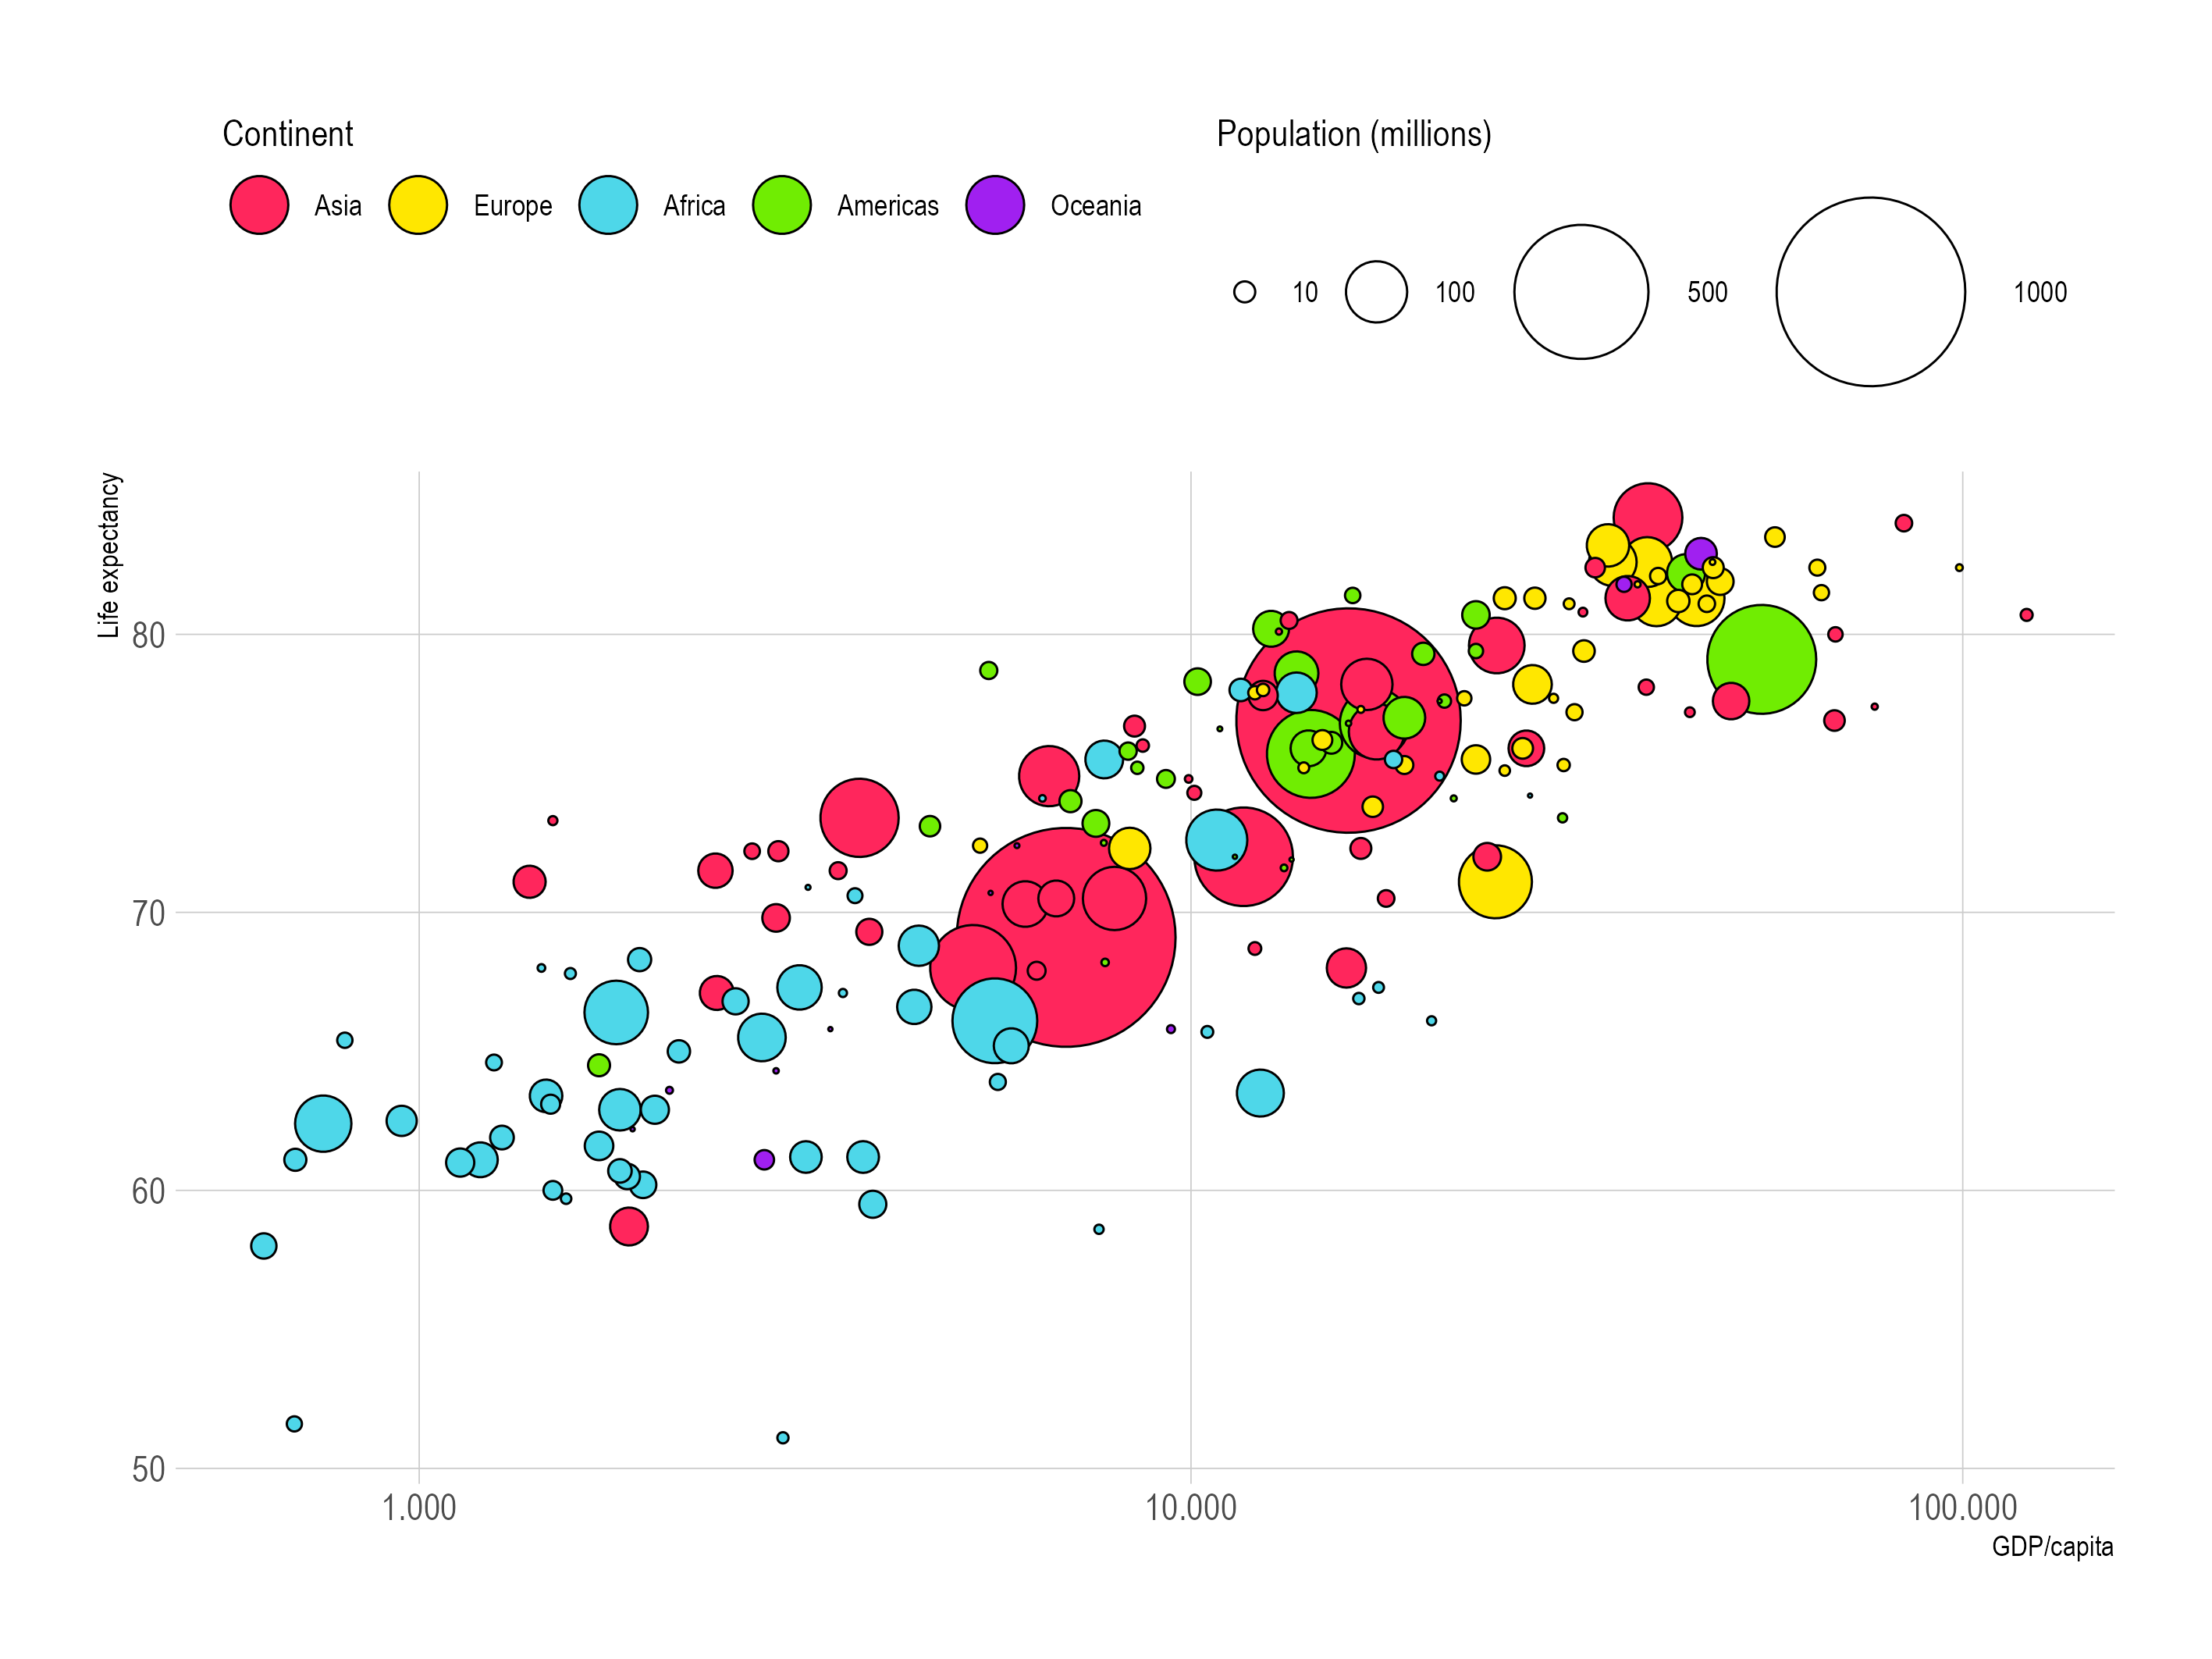 A bubble chart of countries, with life expectancy on the y axis and GDP/capita on the x axis